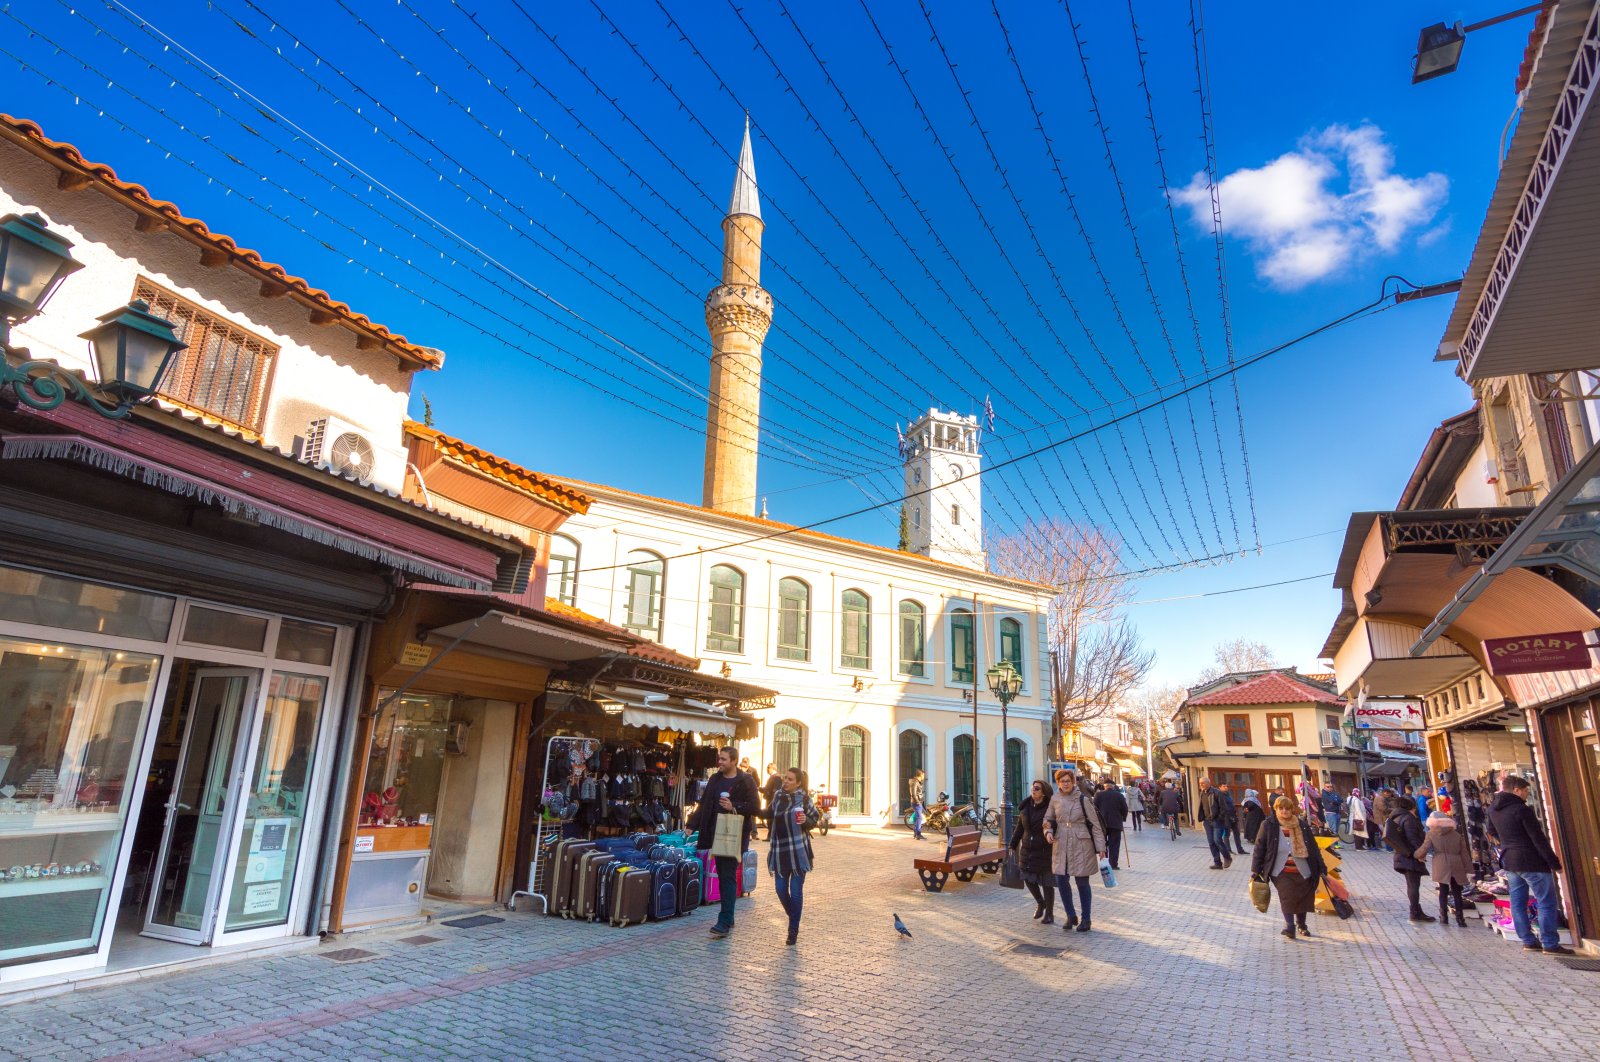 People walking in the streets of Komotini town, on a typical winters morning, Western Thrace, Greece, Dec. 30, 2018. (Shutterstock File Photo)